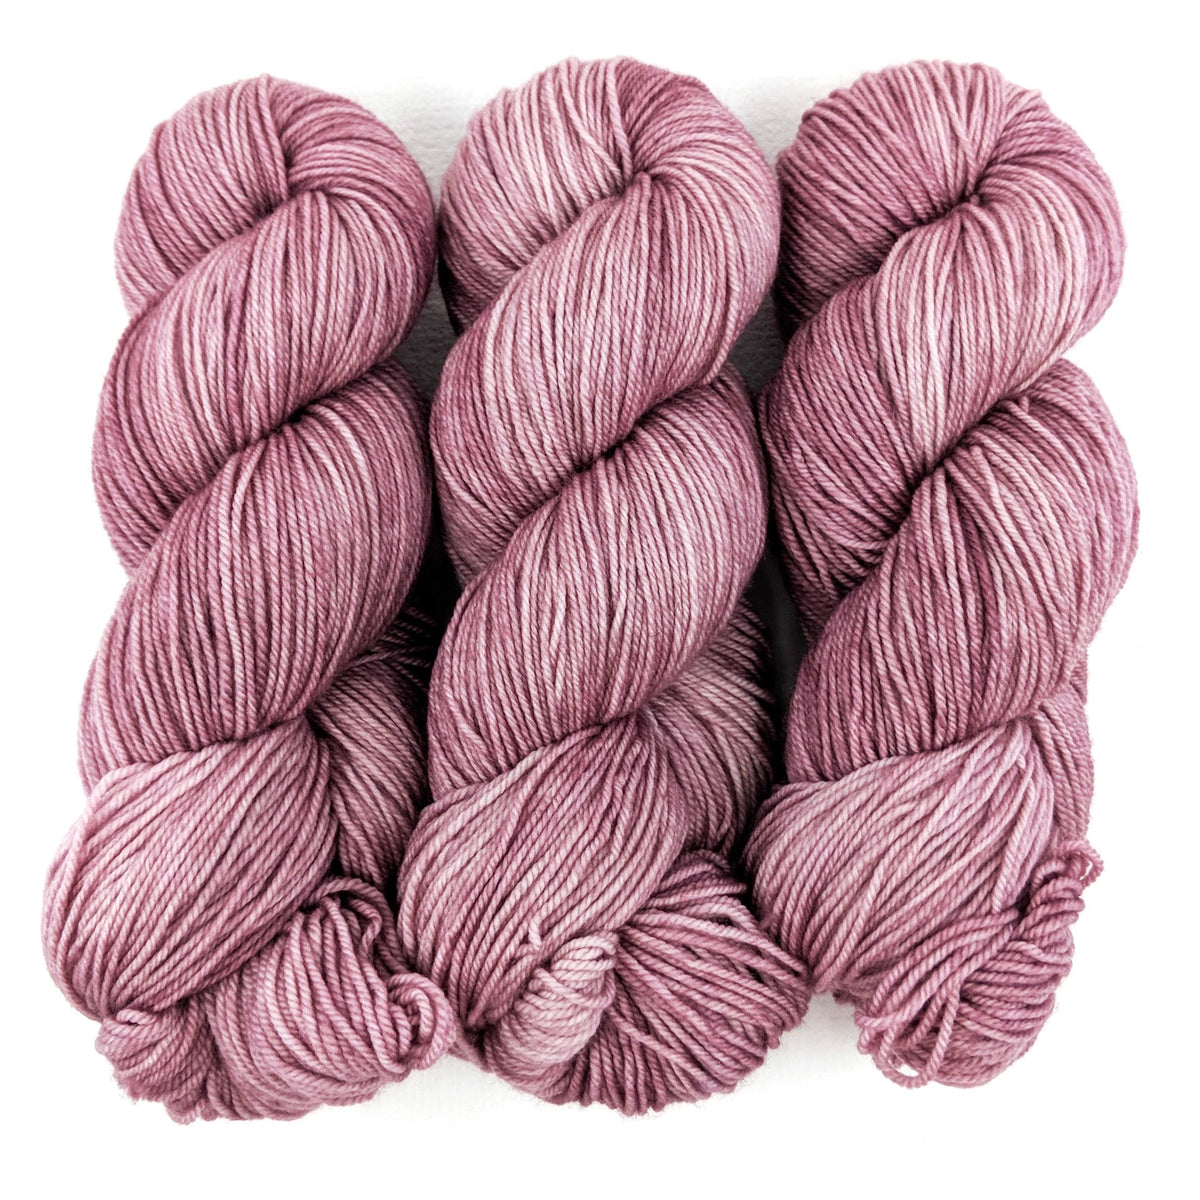 Dusty Rose - Revival Worsted - Dyed Stock